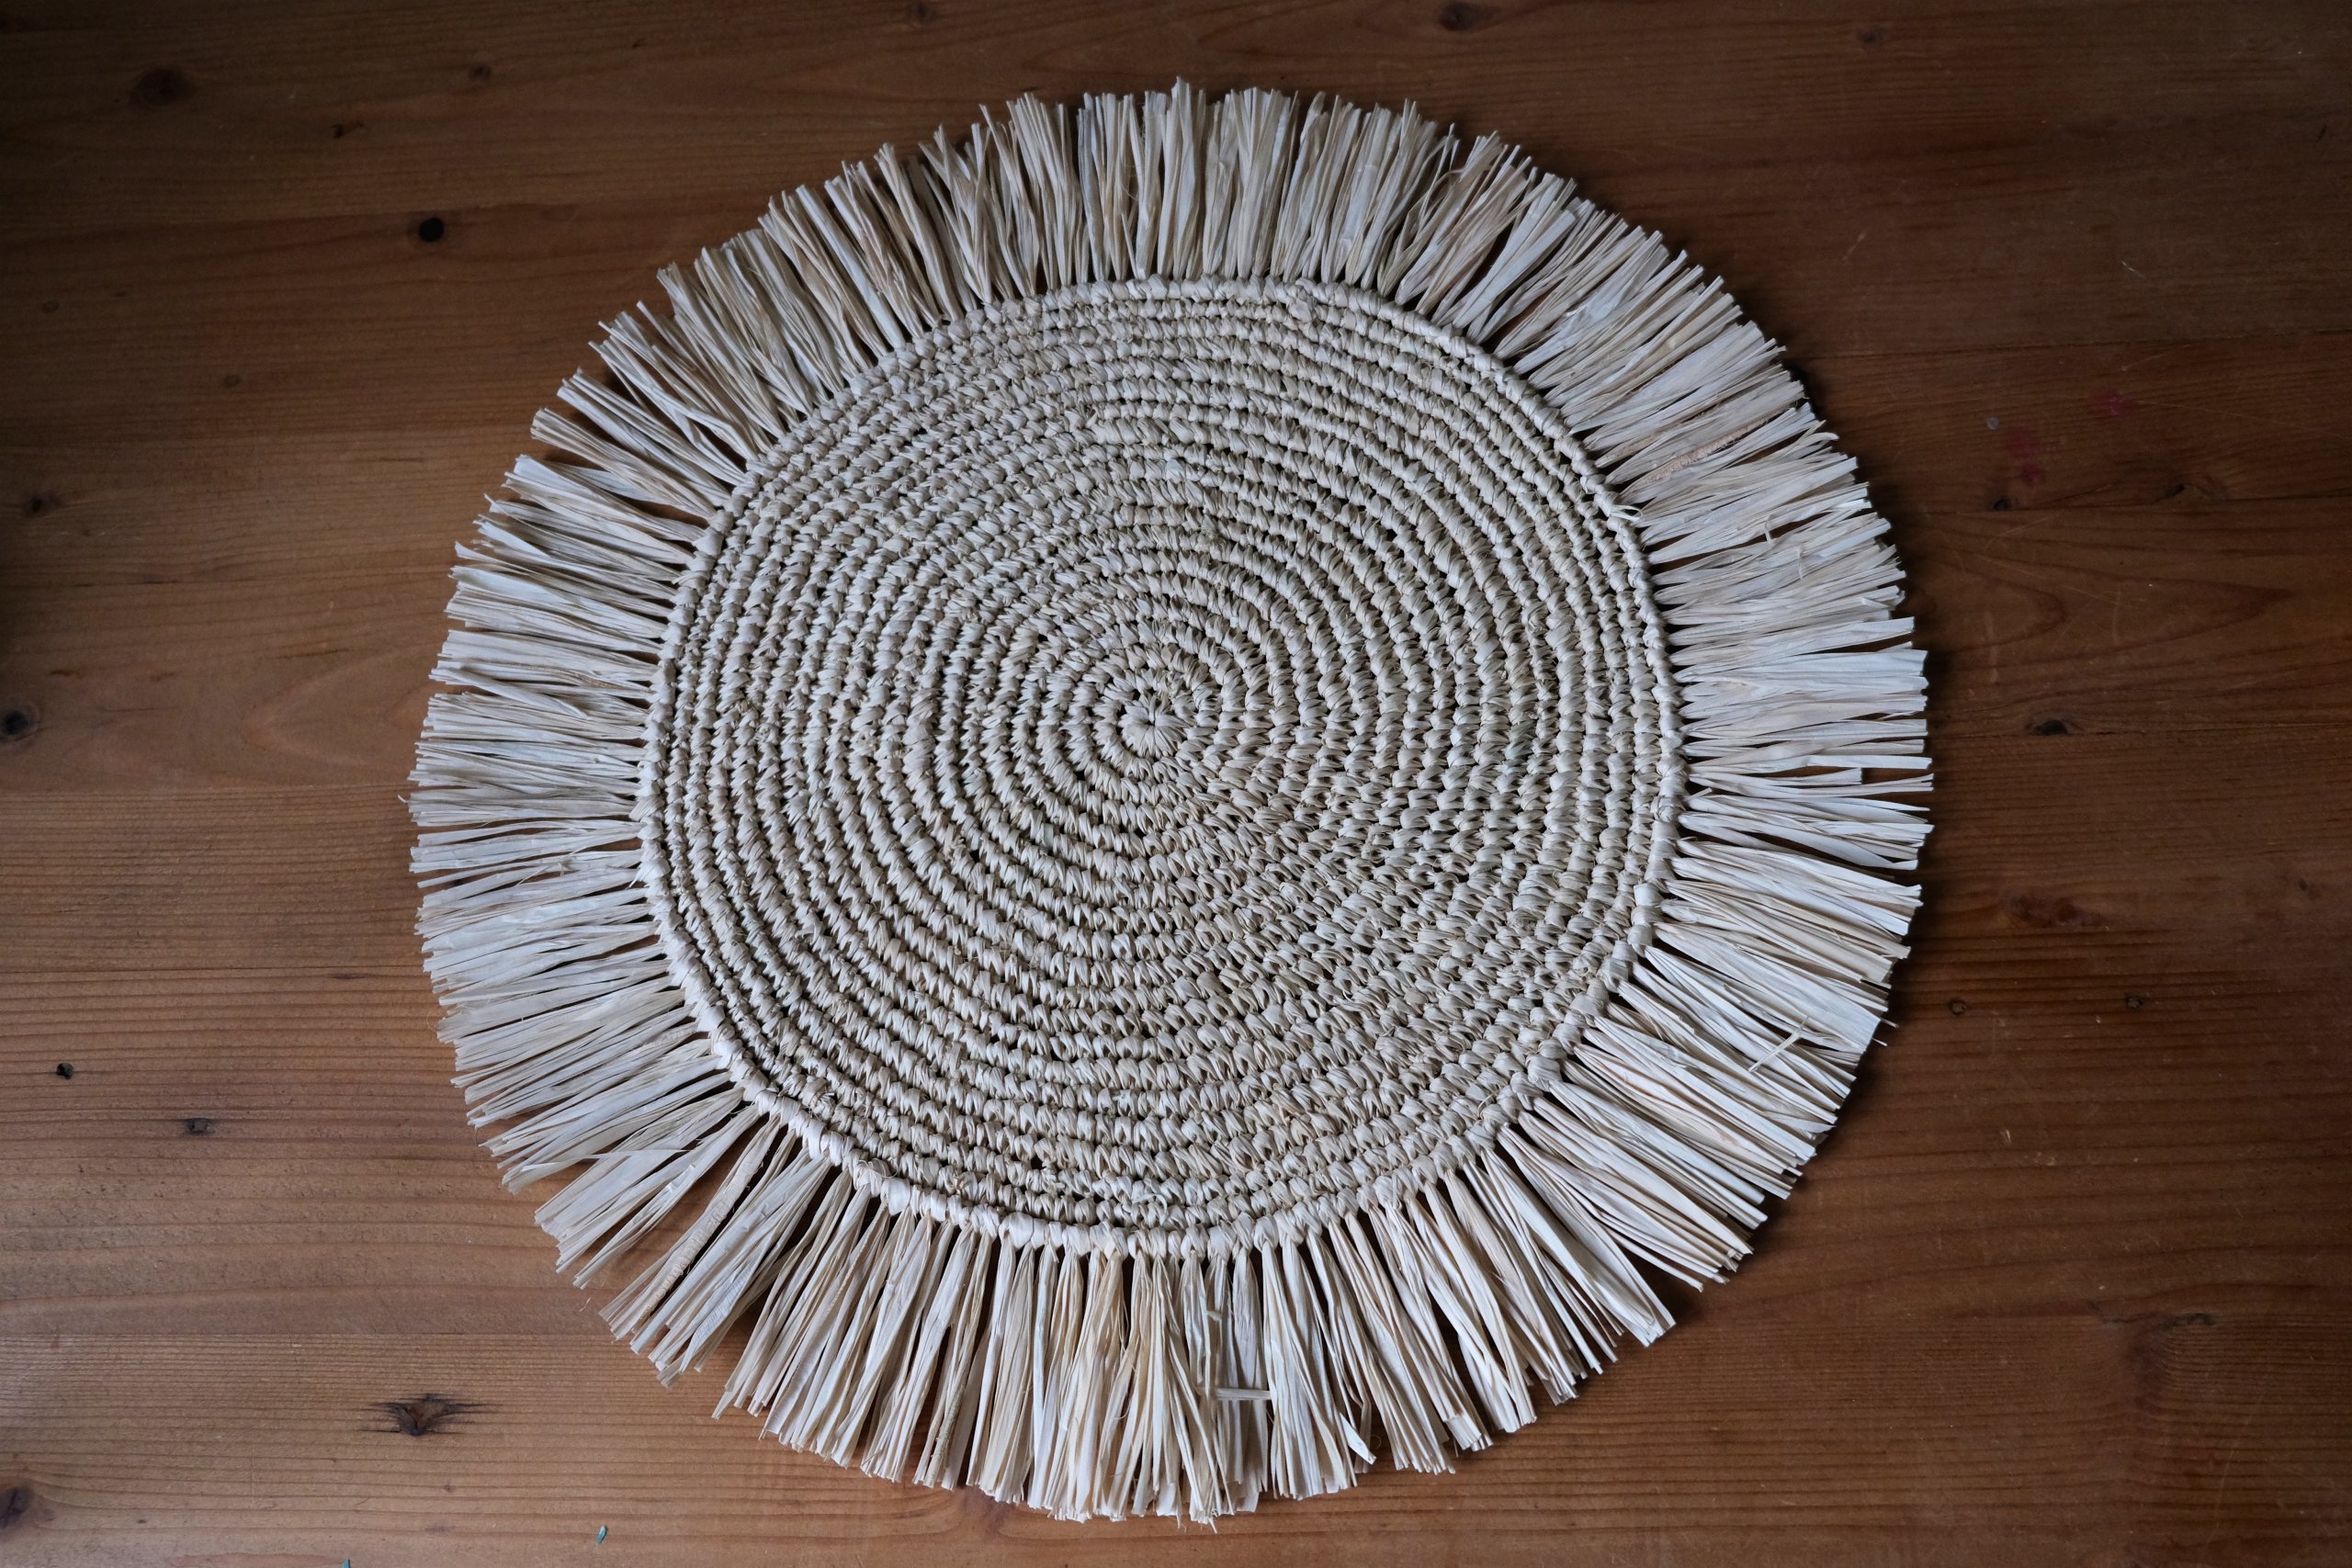 Raffia Placemat with Frills | Round Straw Placemats • ecomersh.